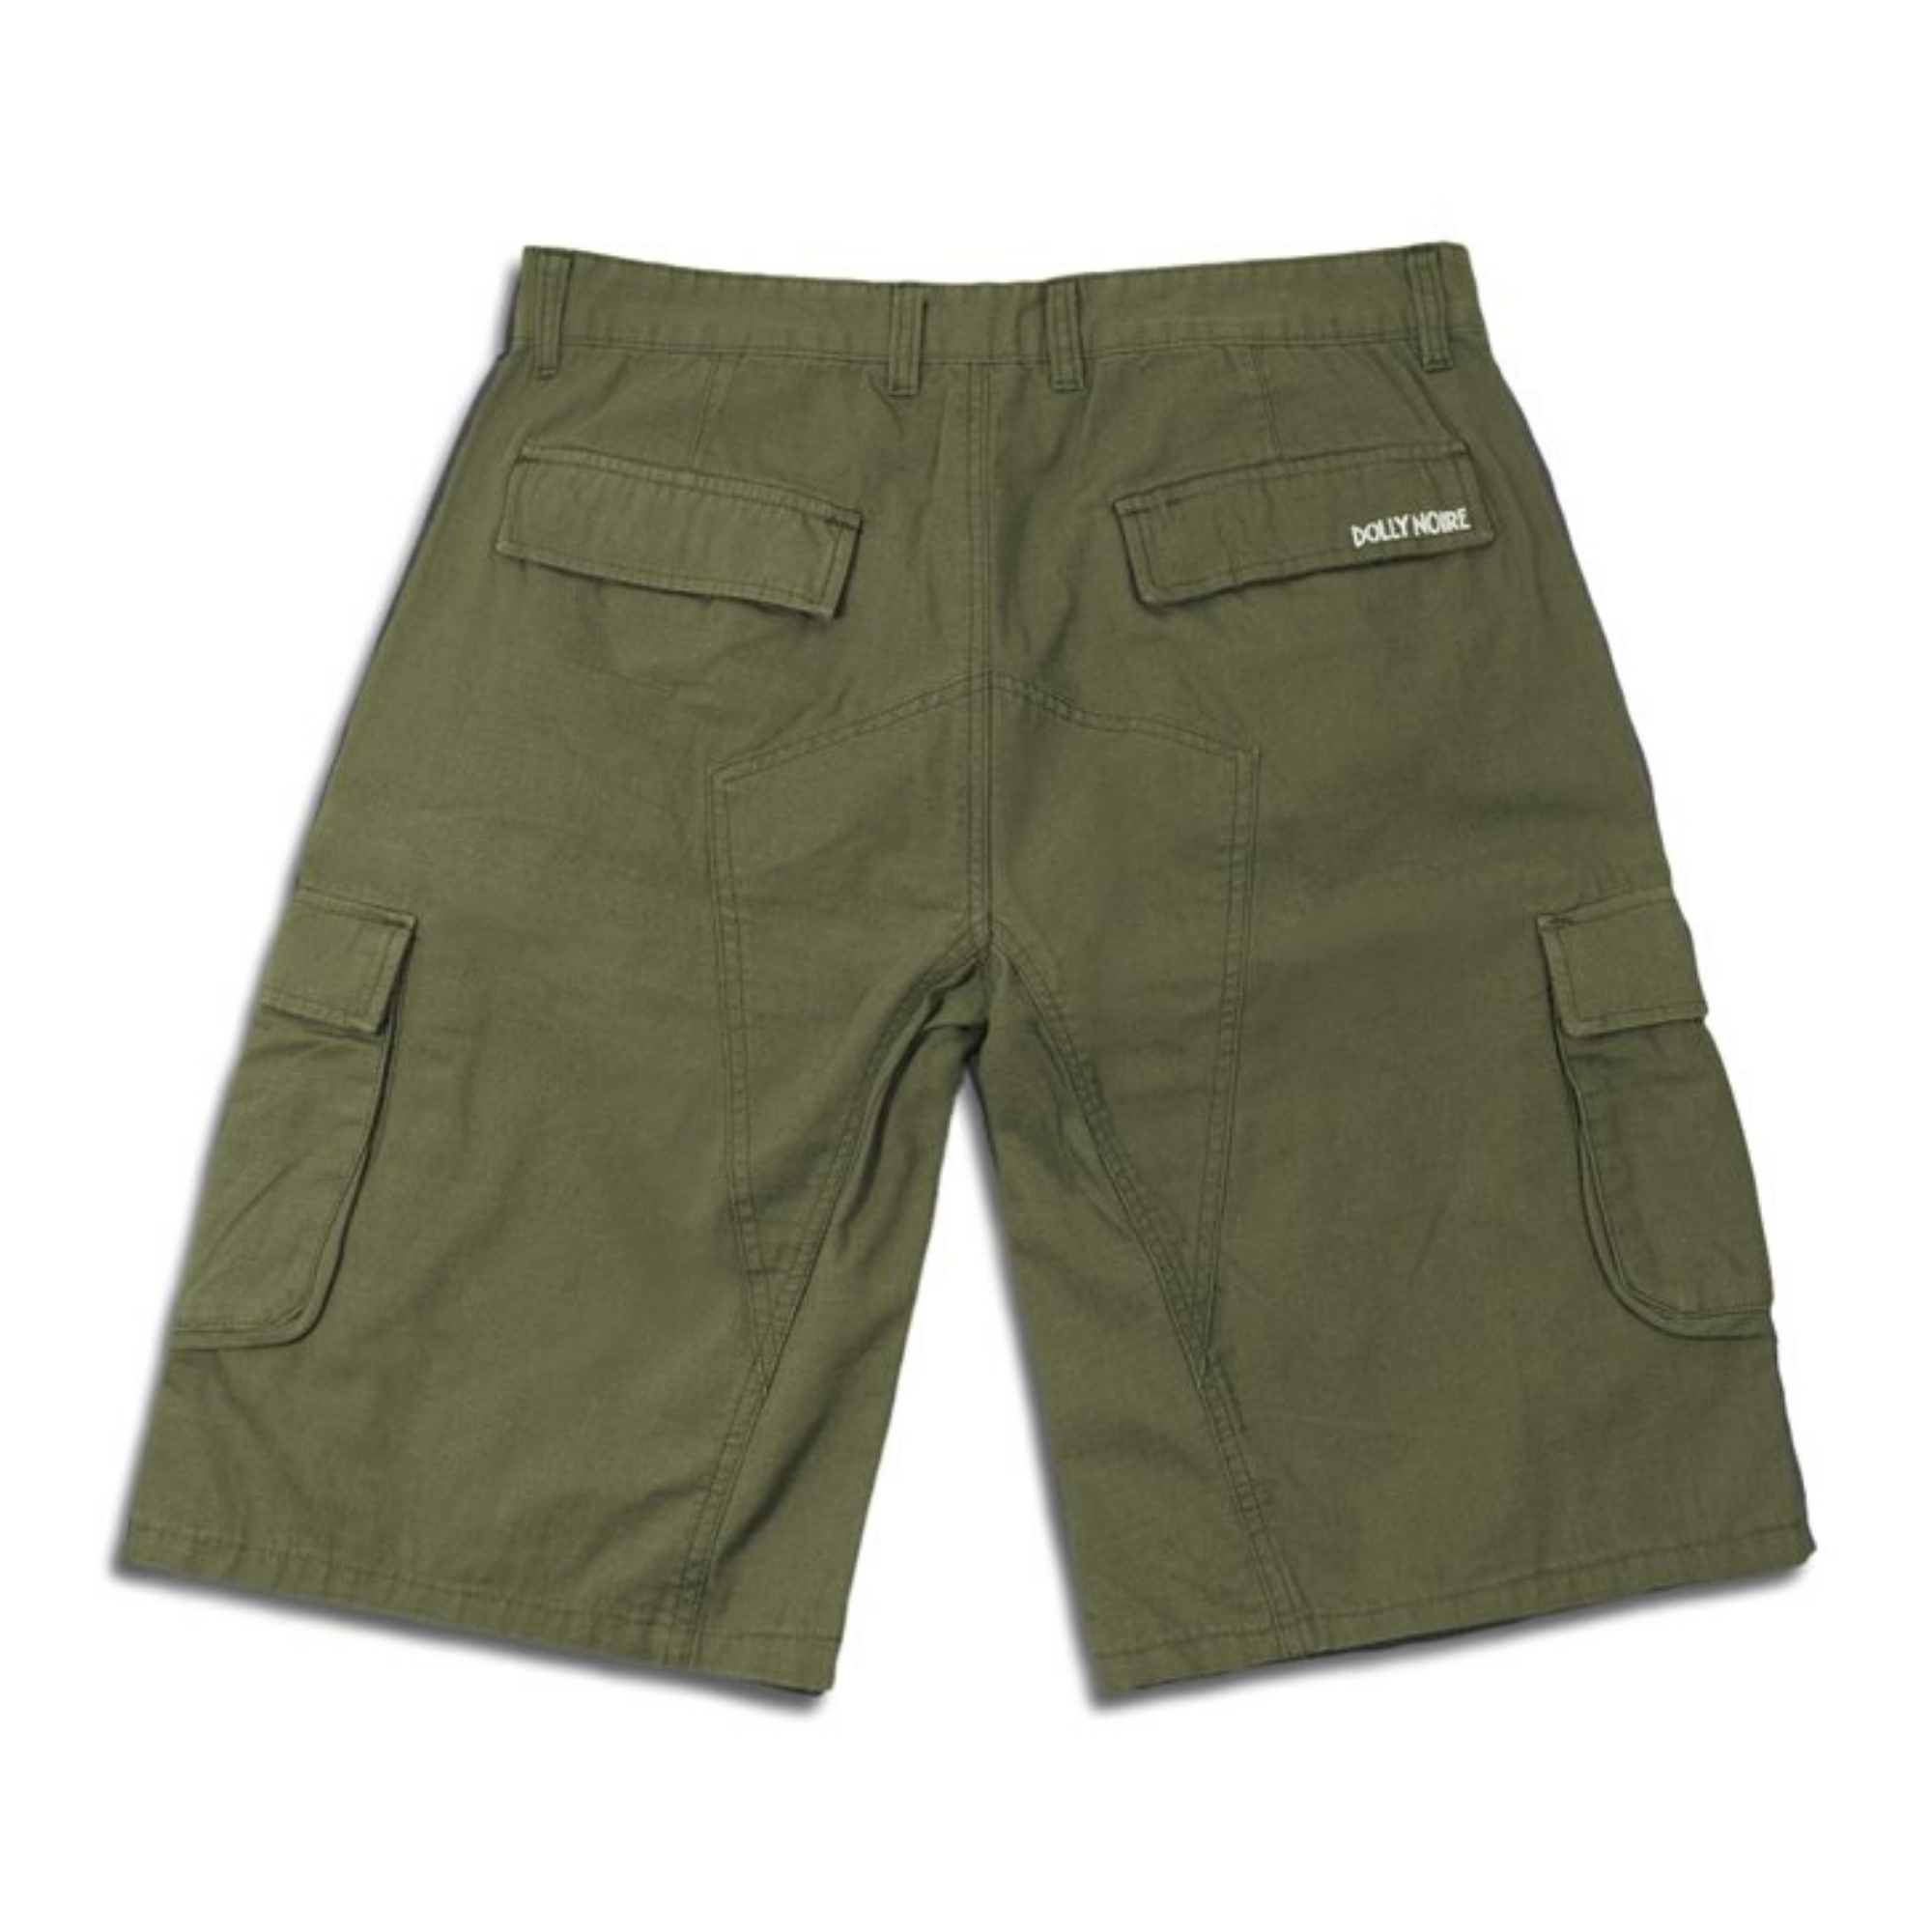 DOLLY NOIRE - Shorts Ripstop Green